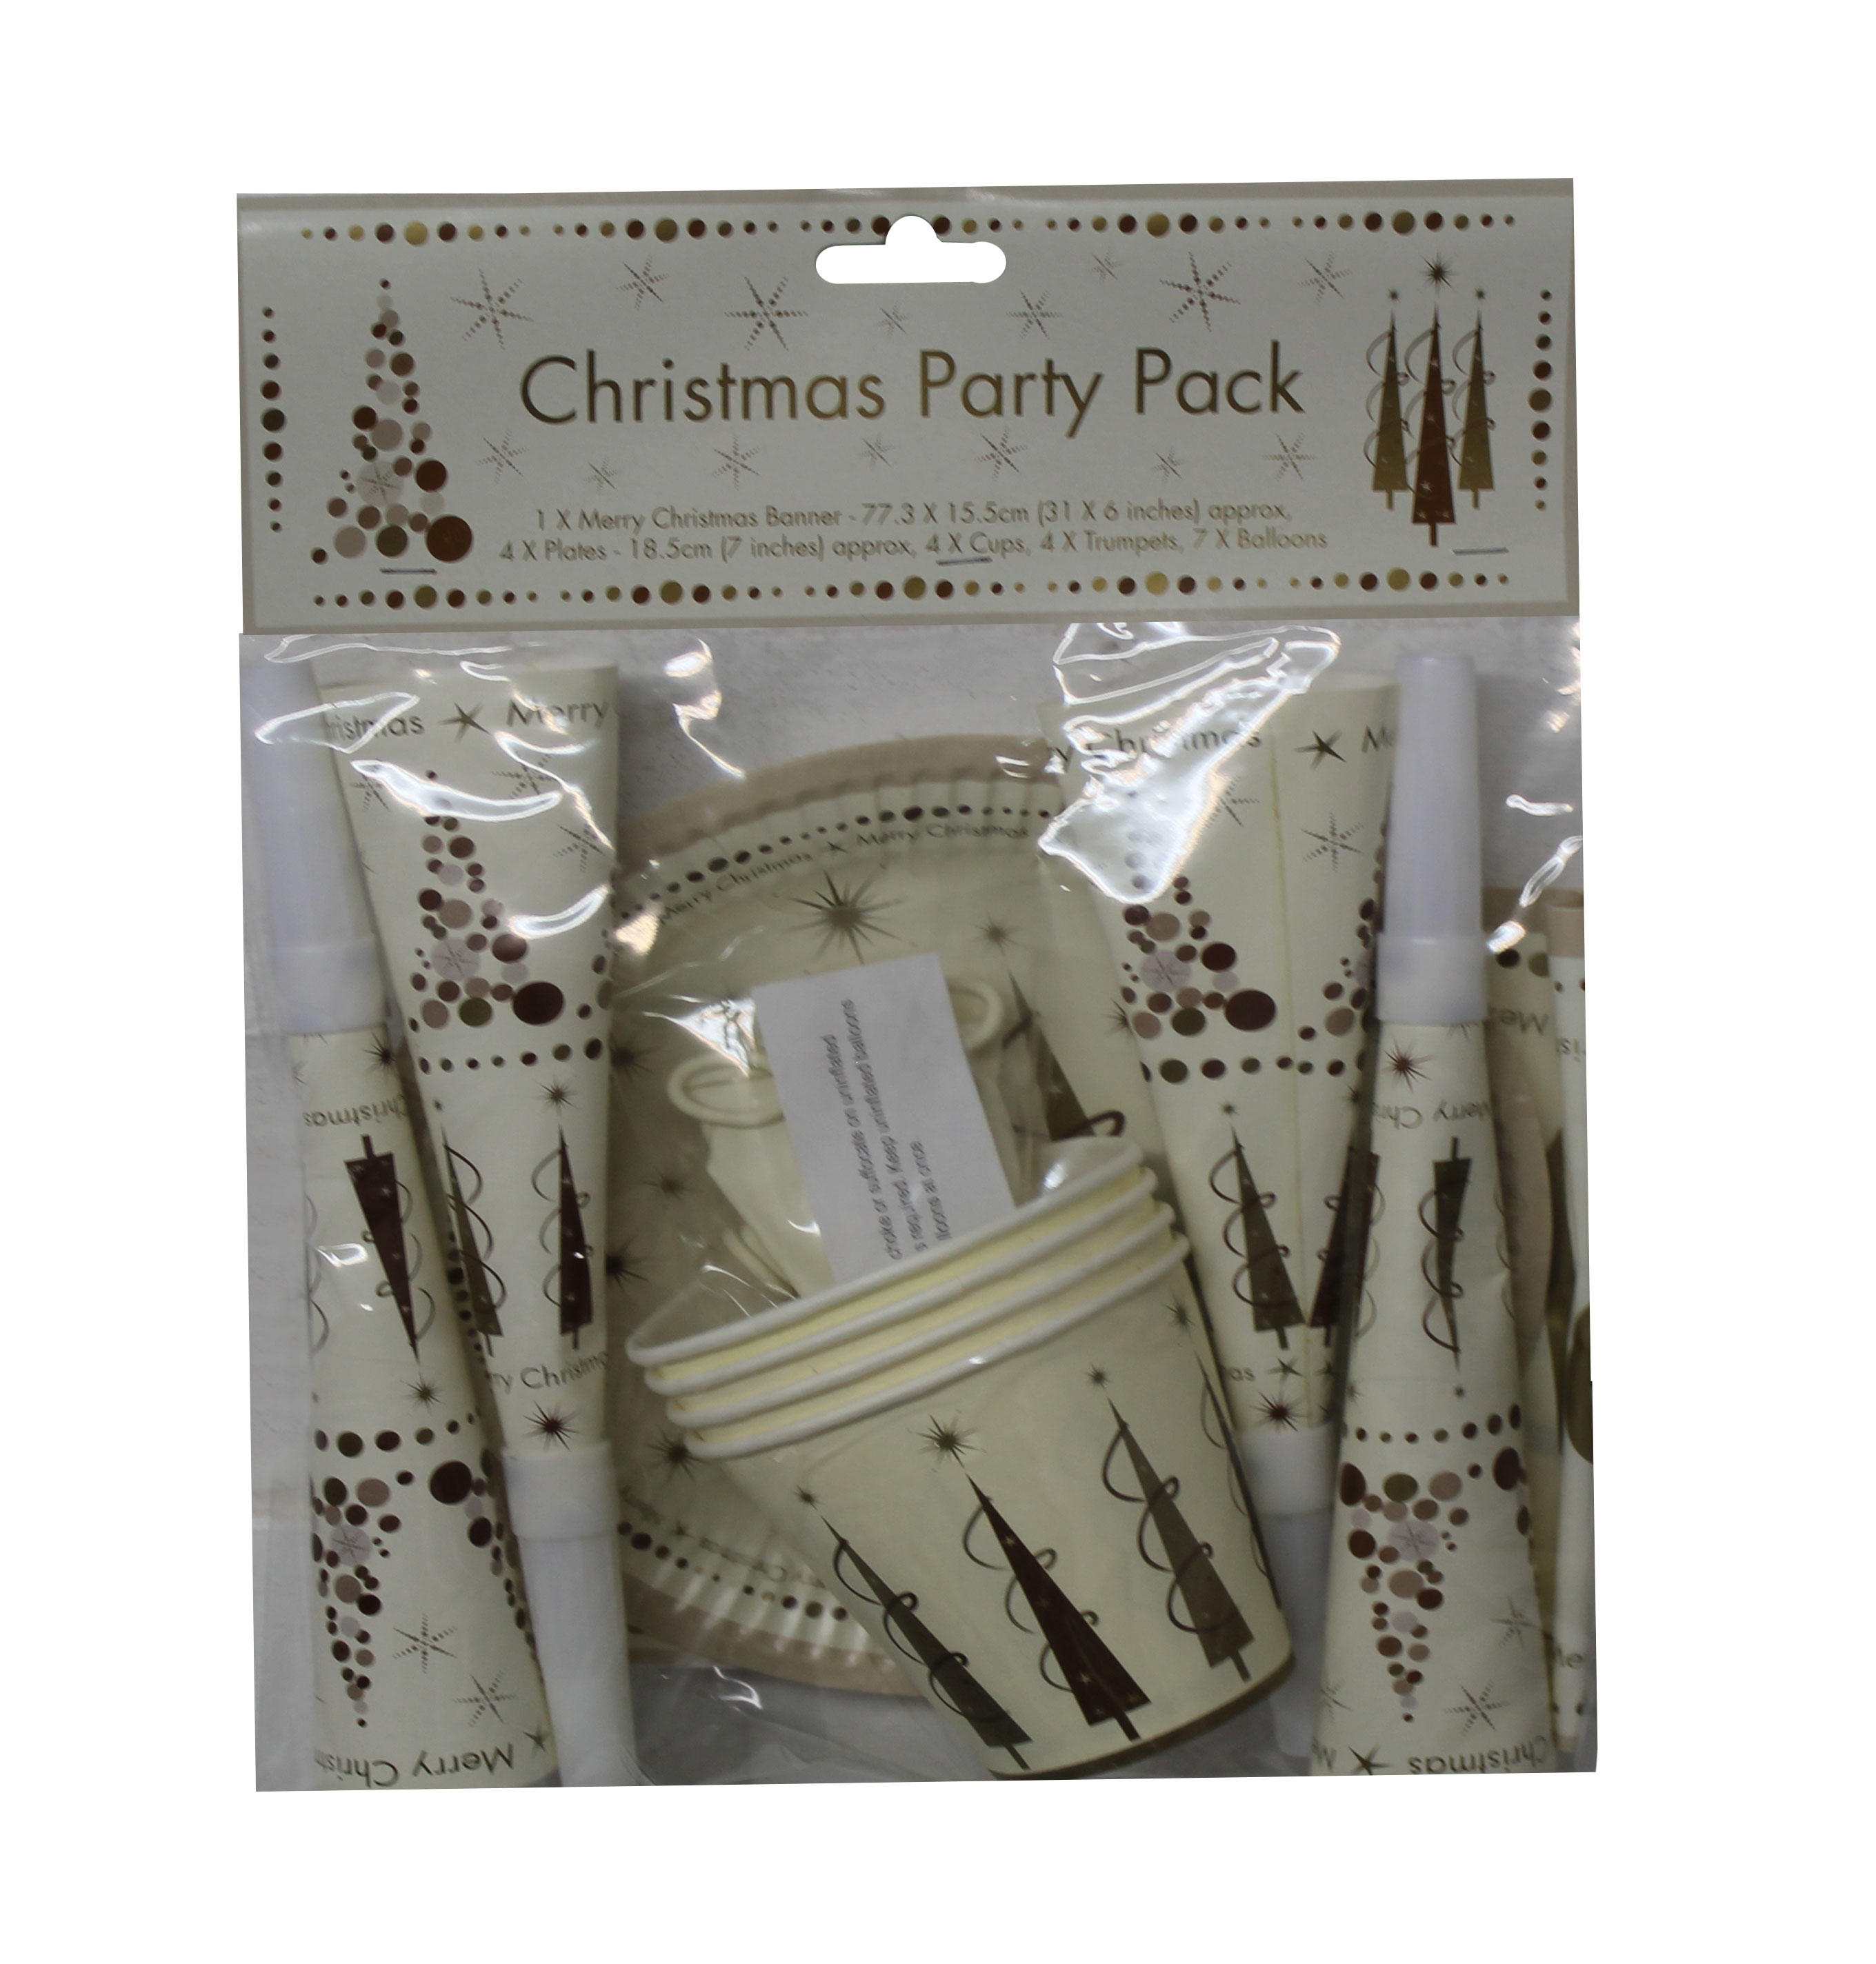 Christmas Party Pack